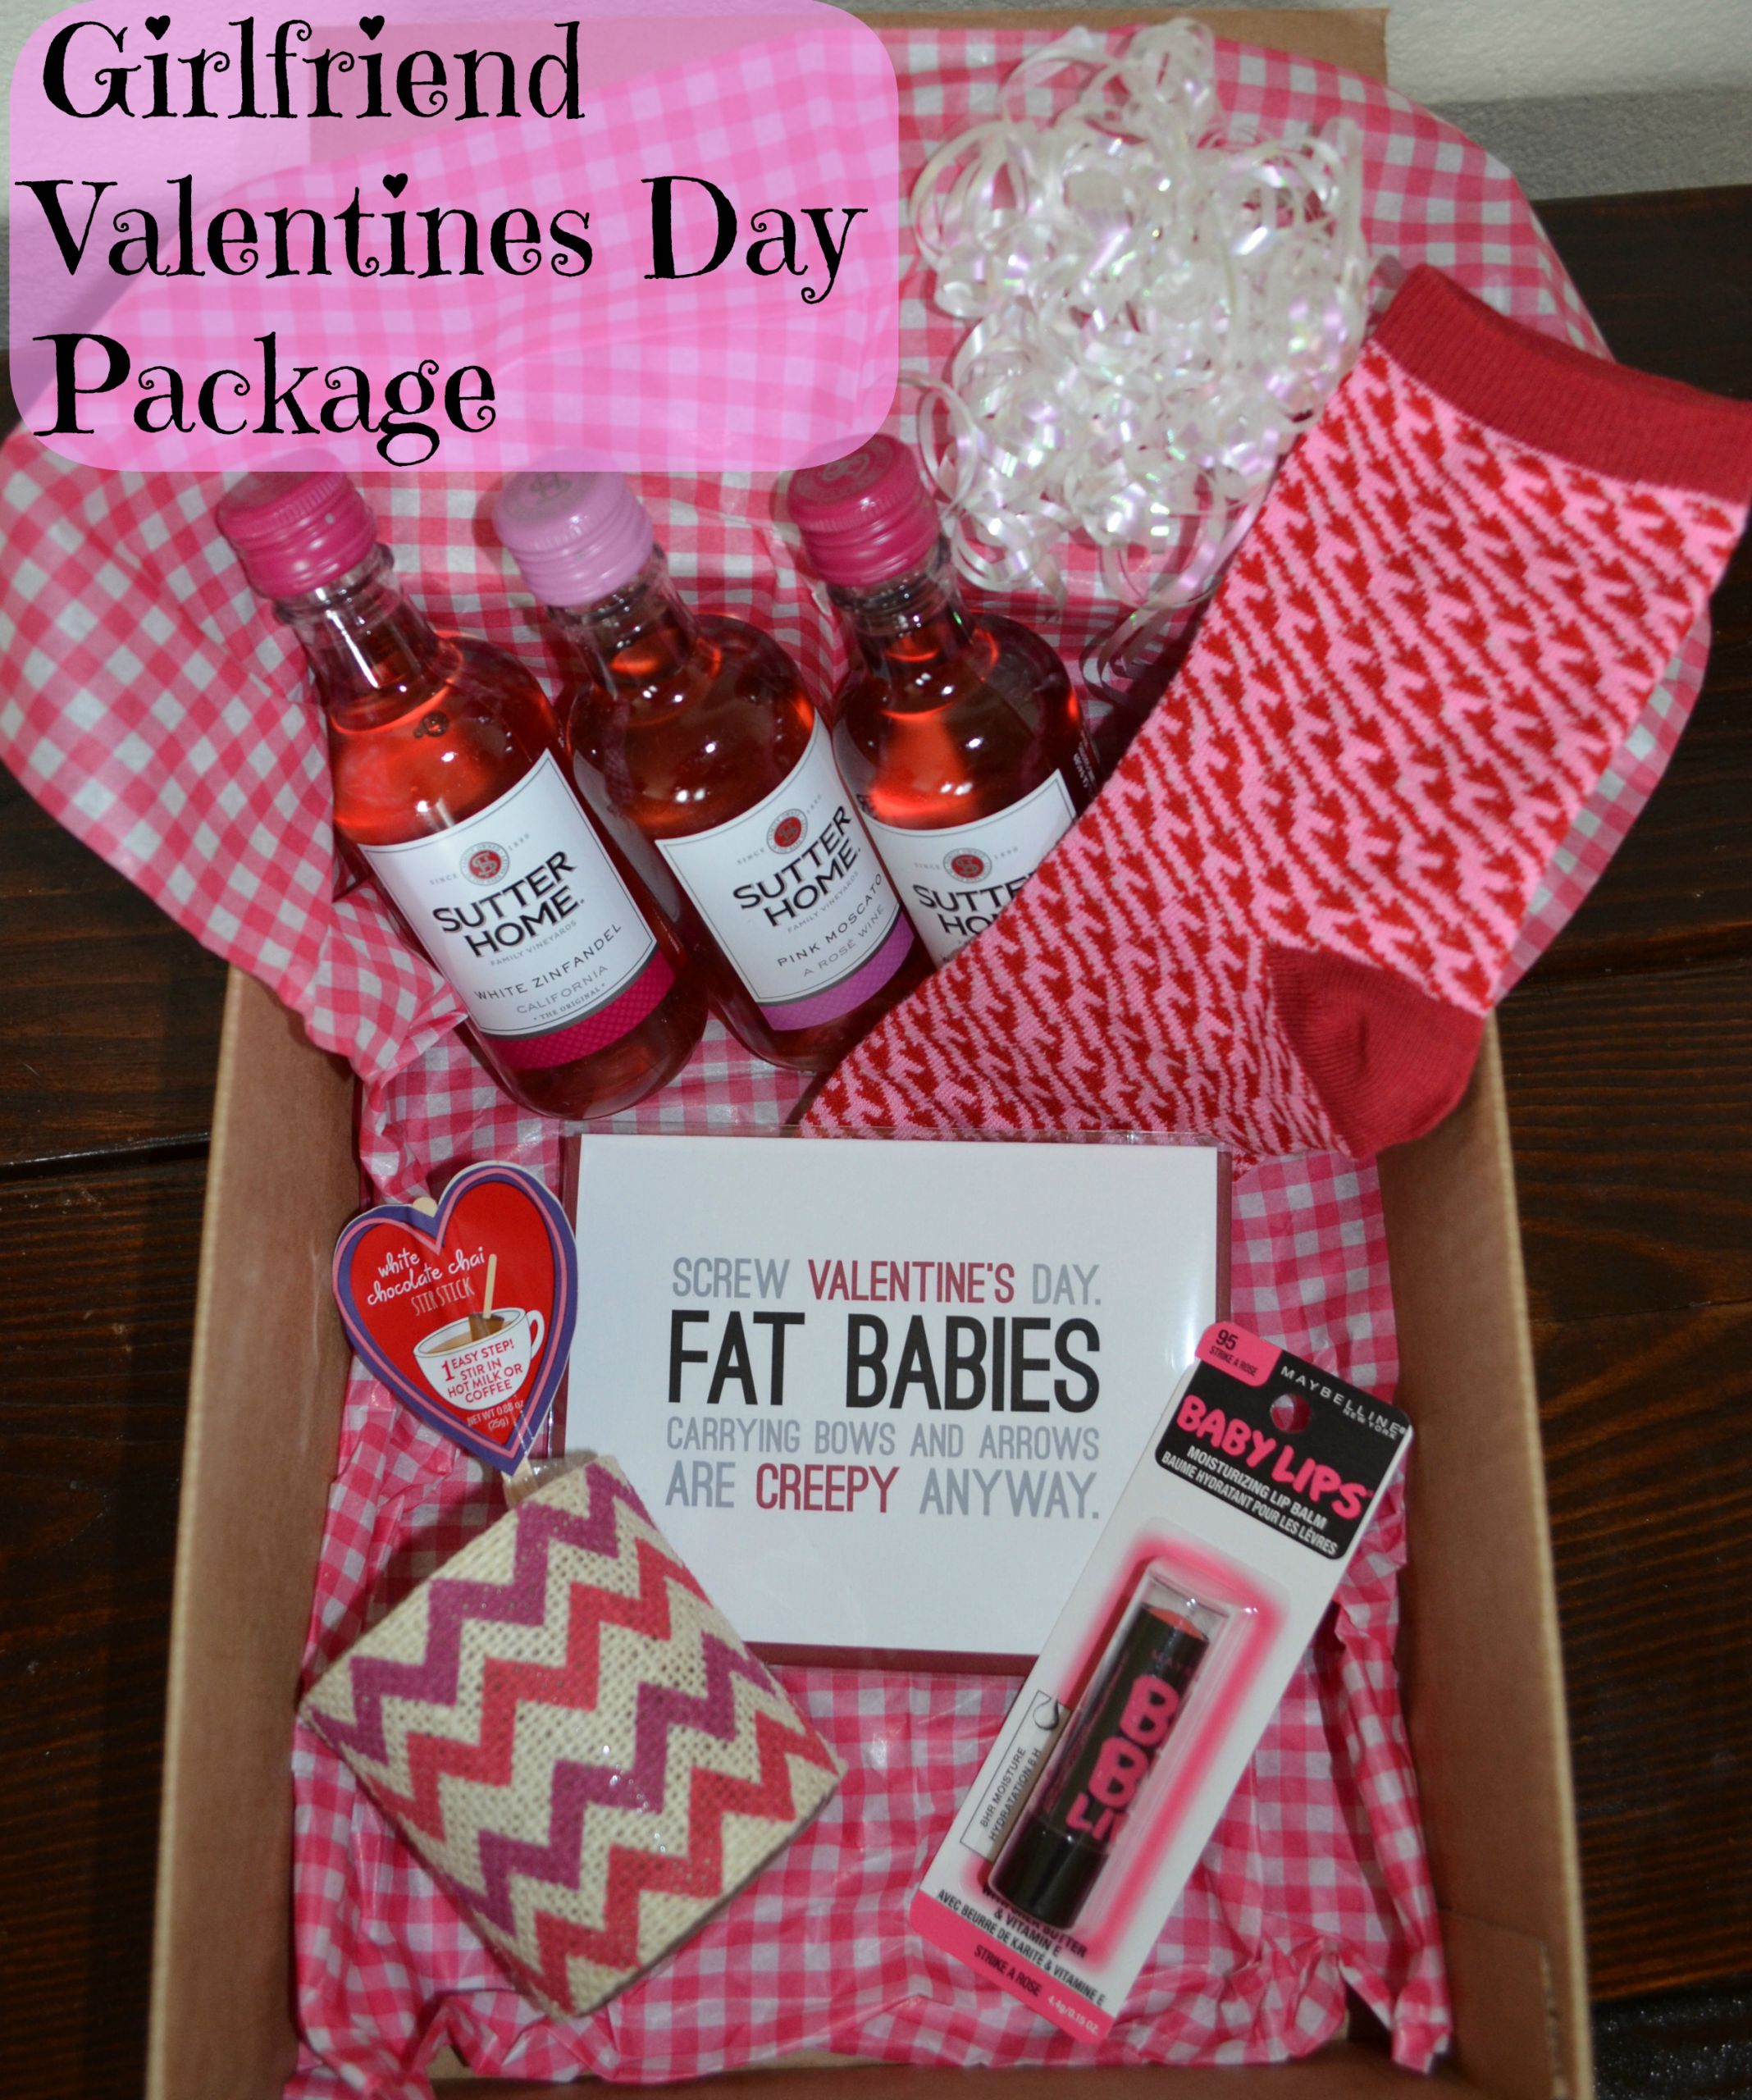 Valentine Gift Ideas To Wife
 24 ADORABLE GIFT IDEAS FOR THE WOMEN IN YOUR LIFE